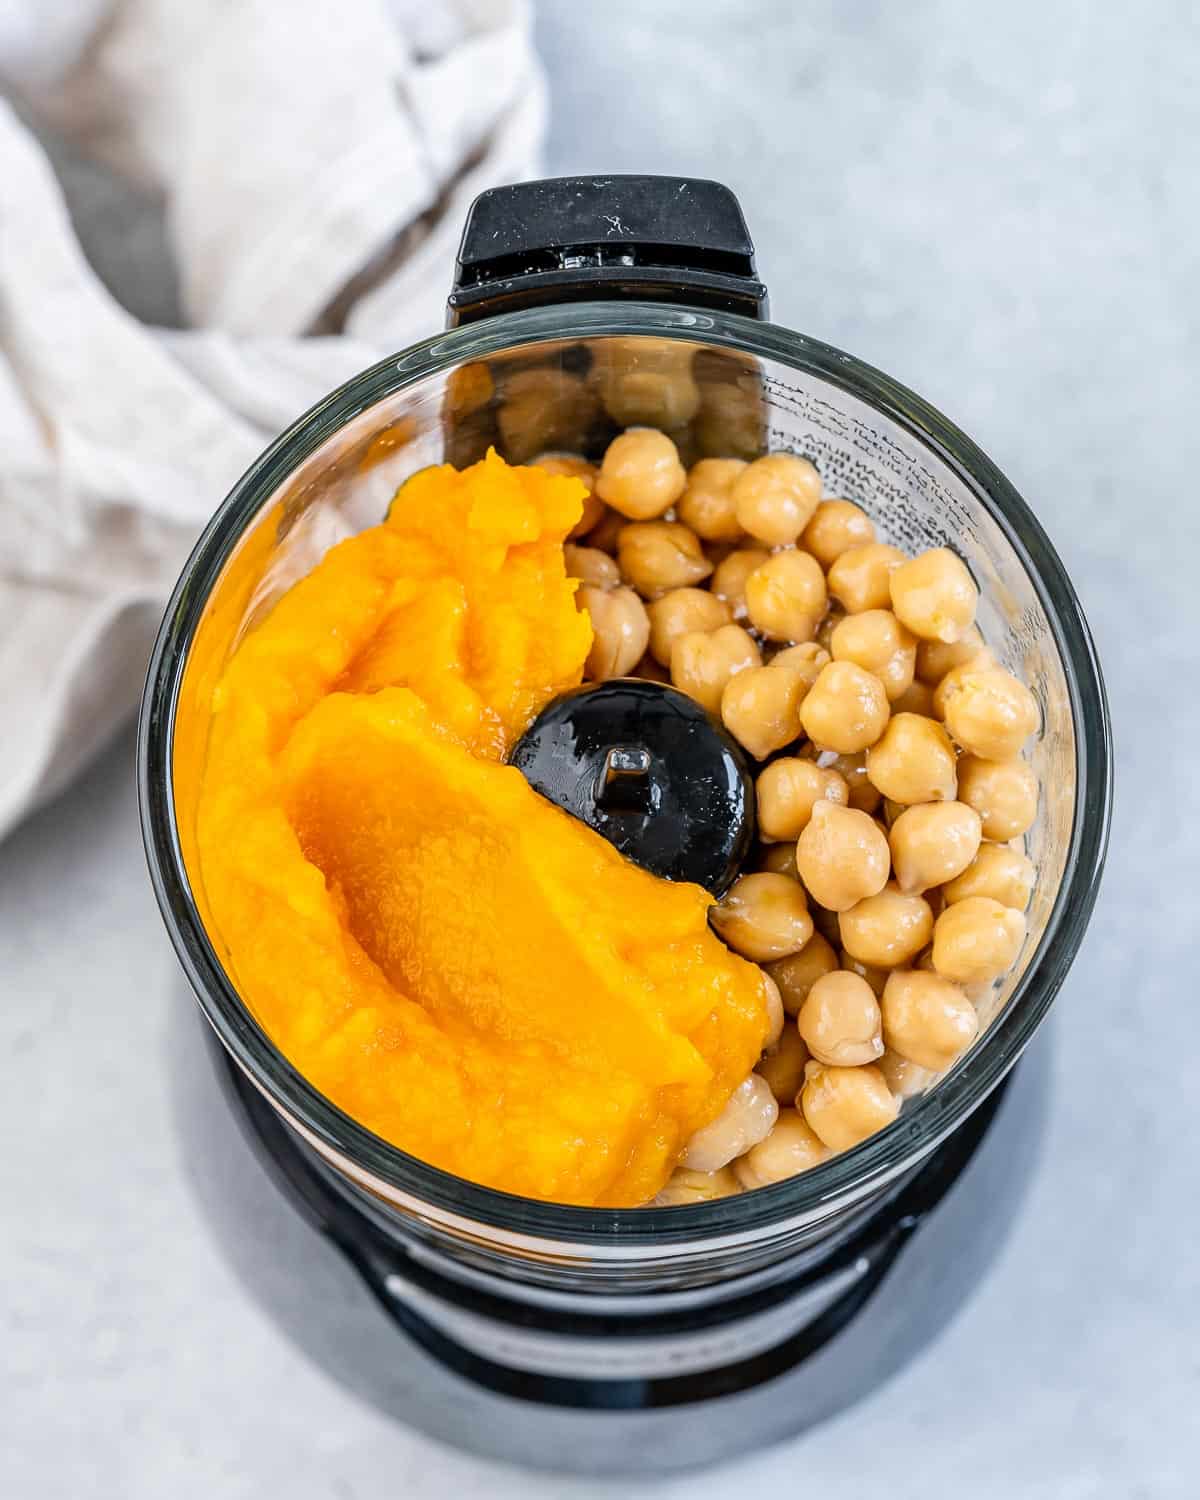 Chickpeas and pumpkin puree in a food processor.